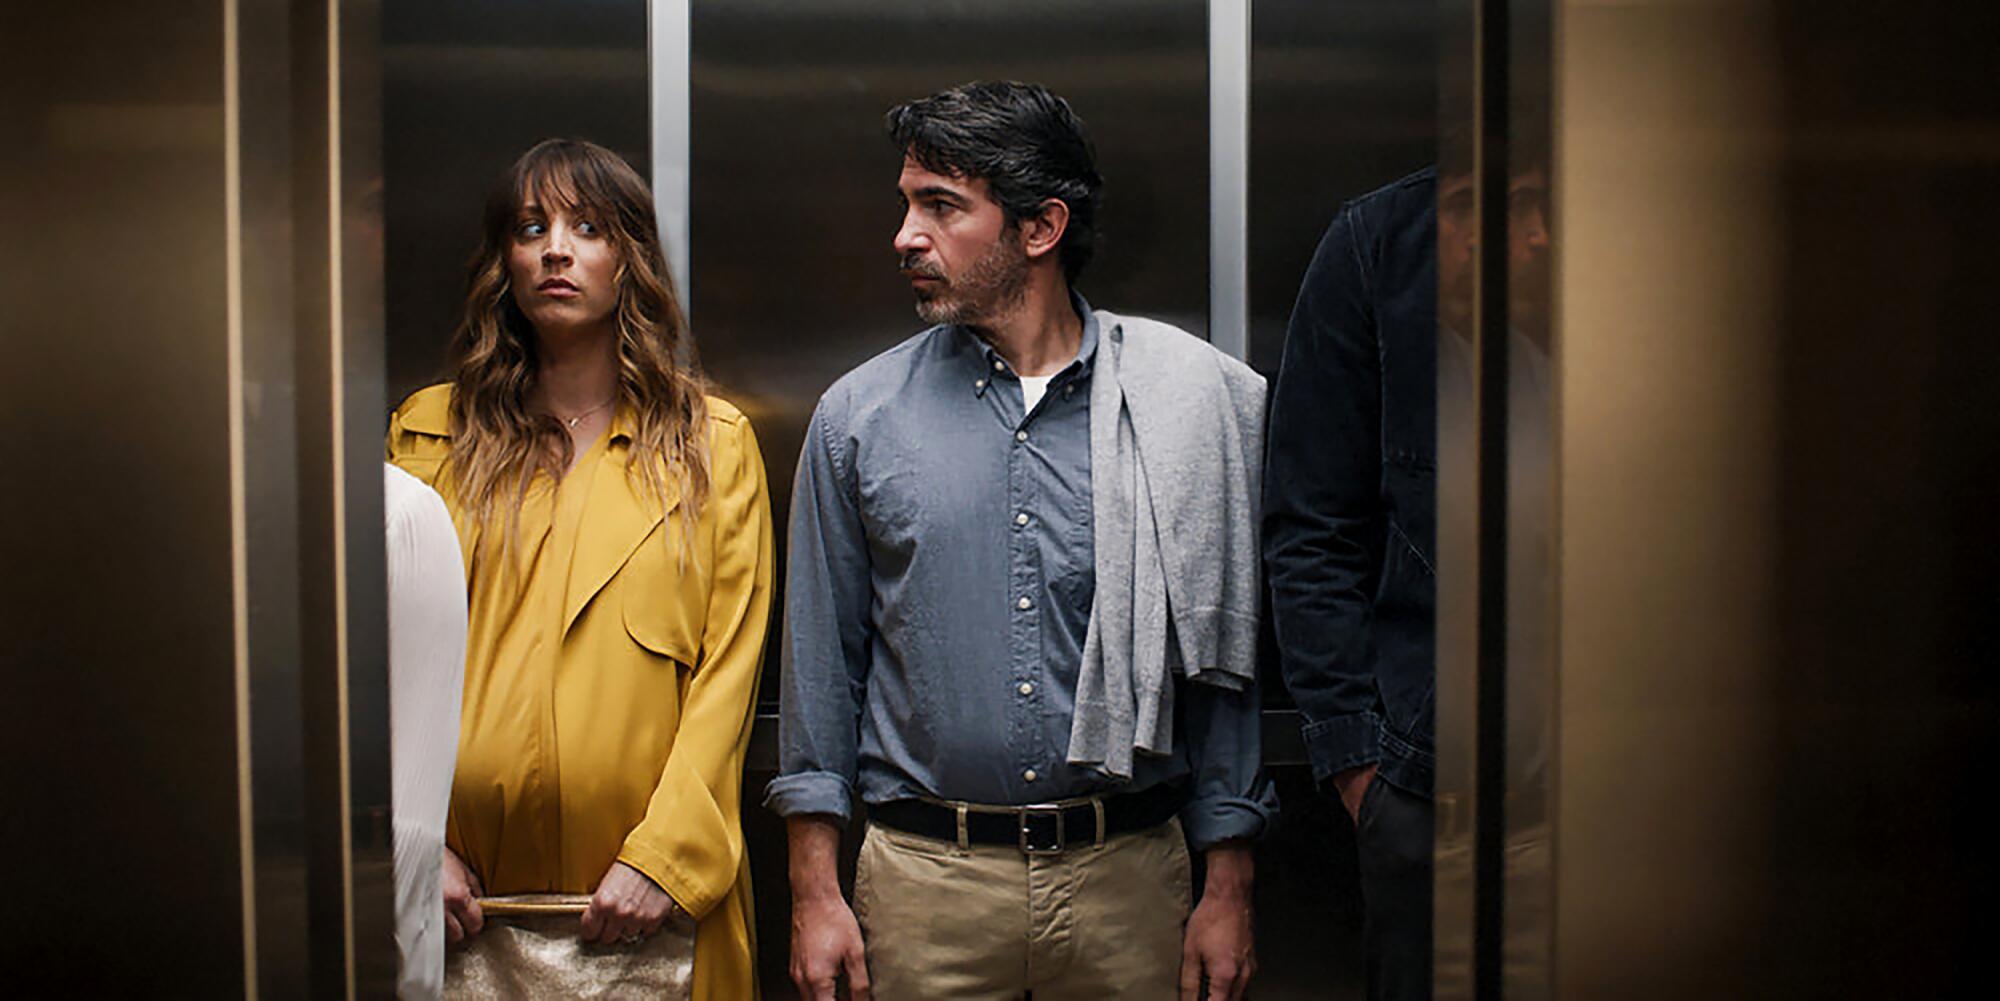 A pregnant woman and a man stand in an elevator looking startled in "Based on a True Story."